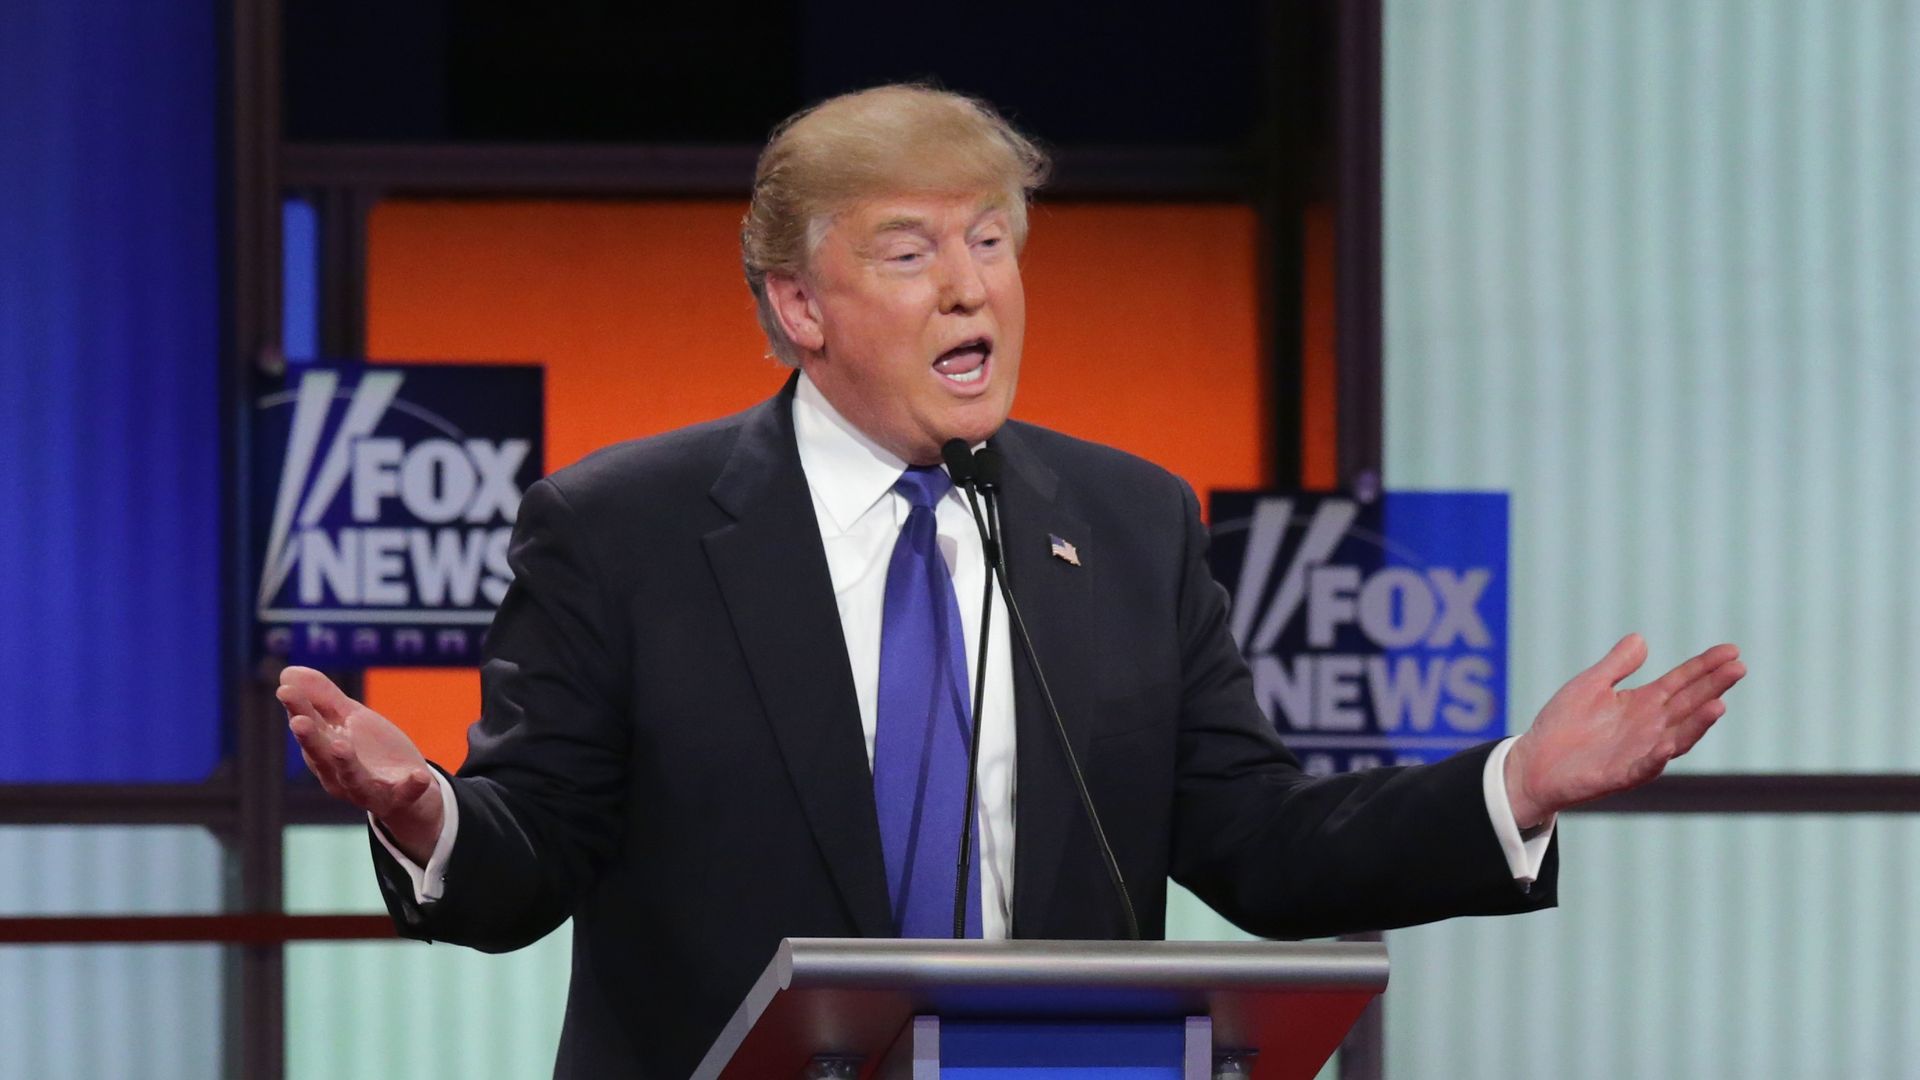 Fox isn't working for us anymore": Trump turns against his ...